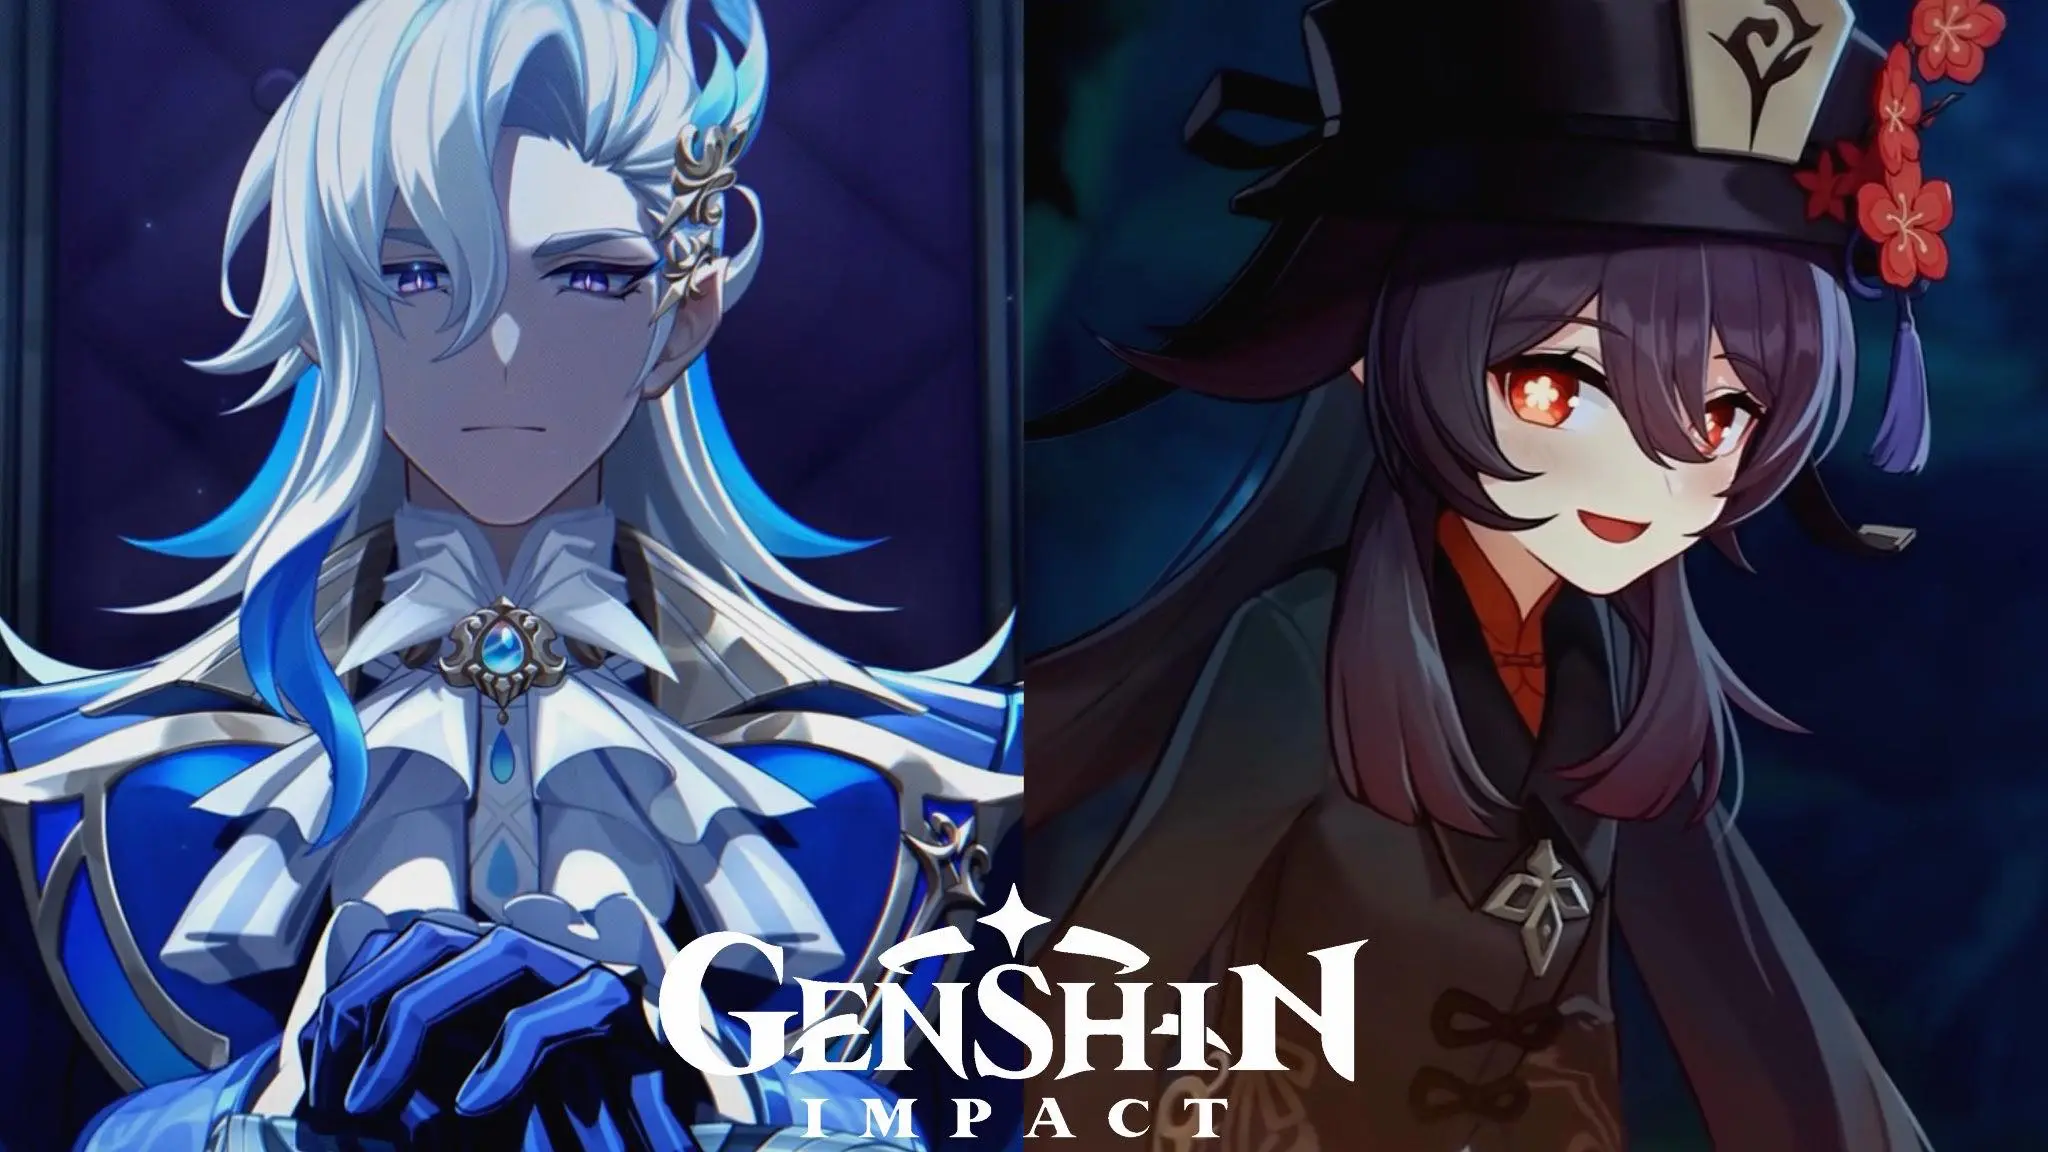 Should You Pull For Neuvillette or Hu Tao in Genshin Impact?